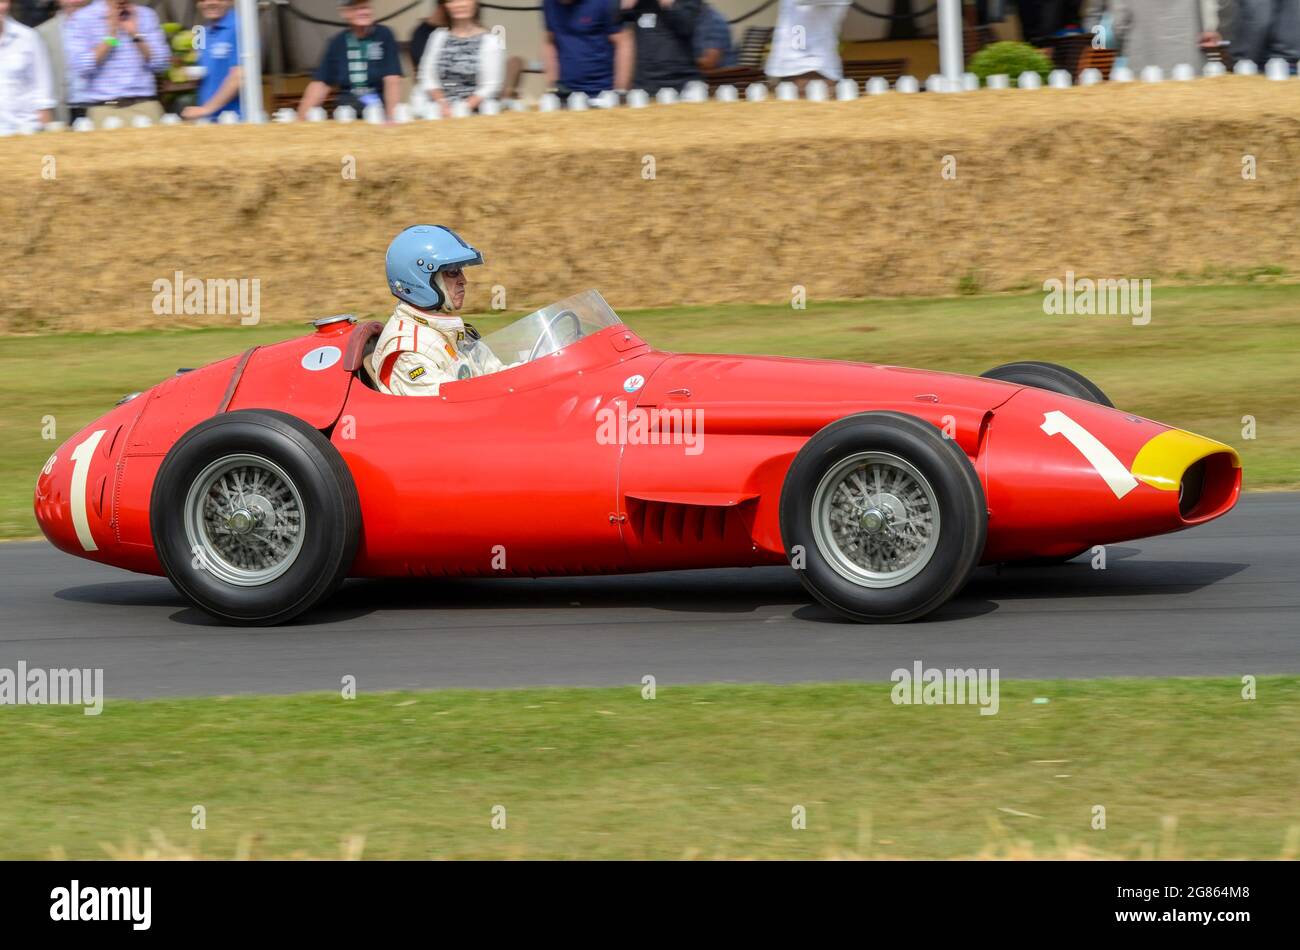 1957 Maserati 250F Lightweight racing up the hill climb at the Goodwood Festival of Speed 2013. Driven by Juan Manuel Fangio to win Formula 1 titles Stock Photo